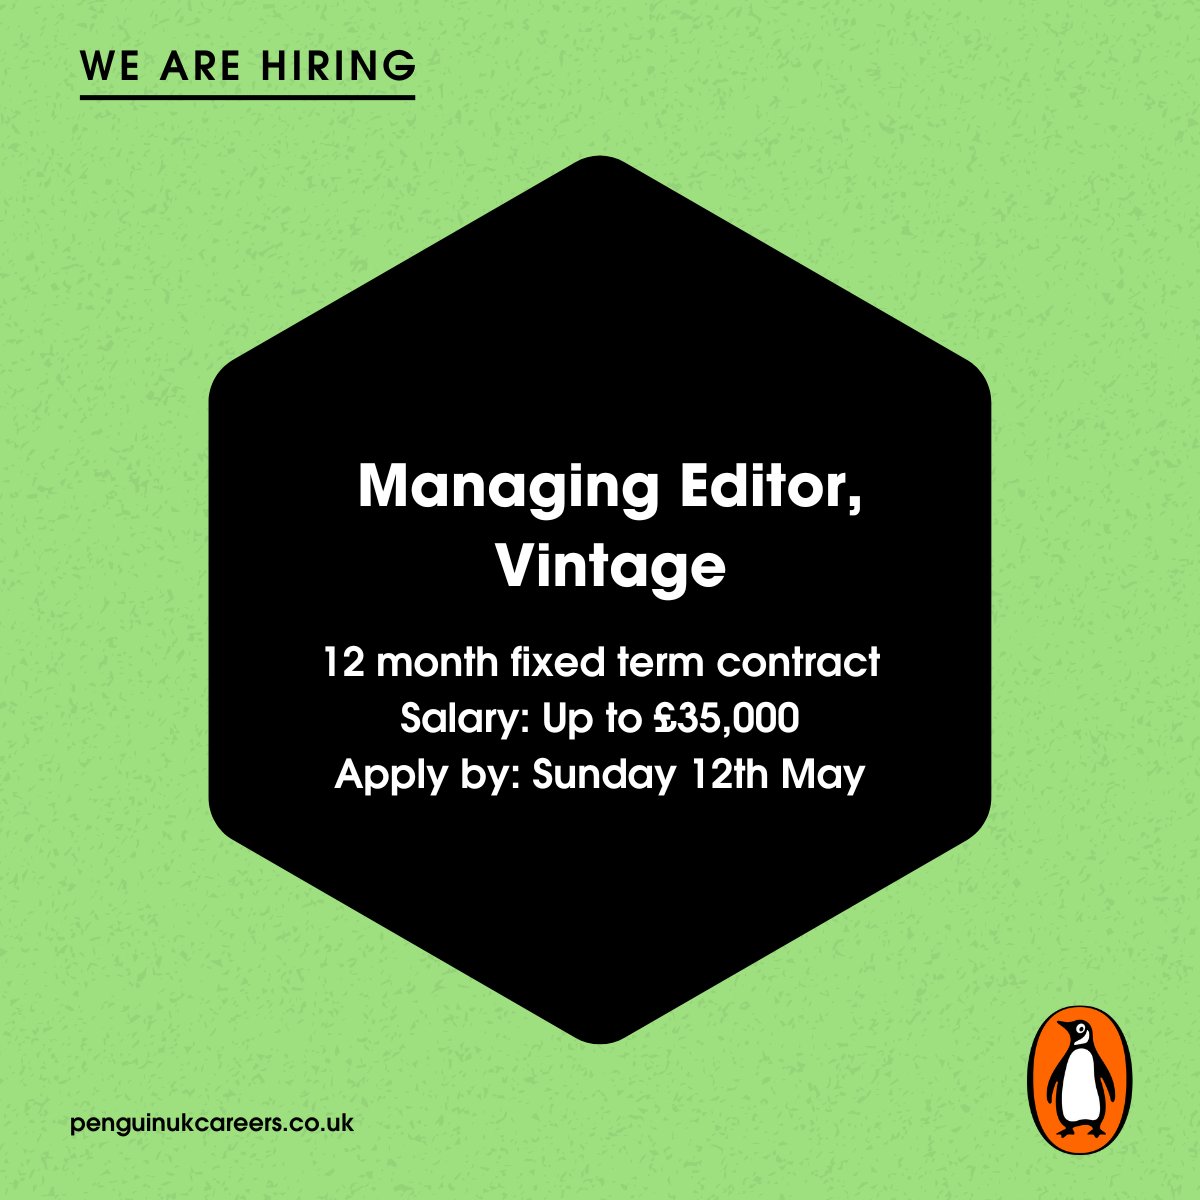 Are you organised, meticulous and experienced in project-managing editorial projects? Come join the world’s largest publisher 🐧 Info: shorturl.at/qstzG